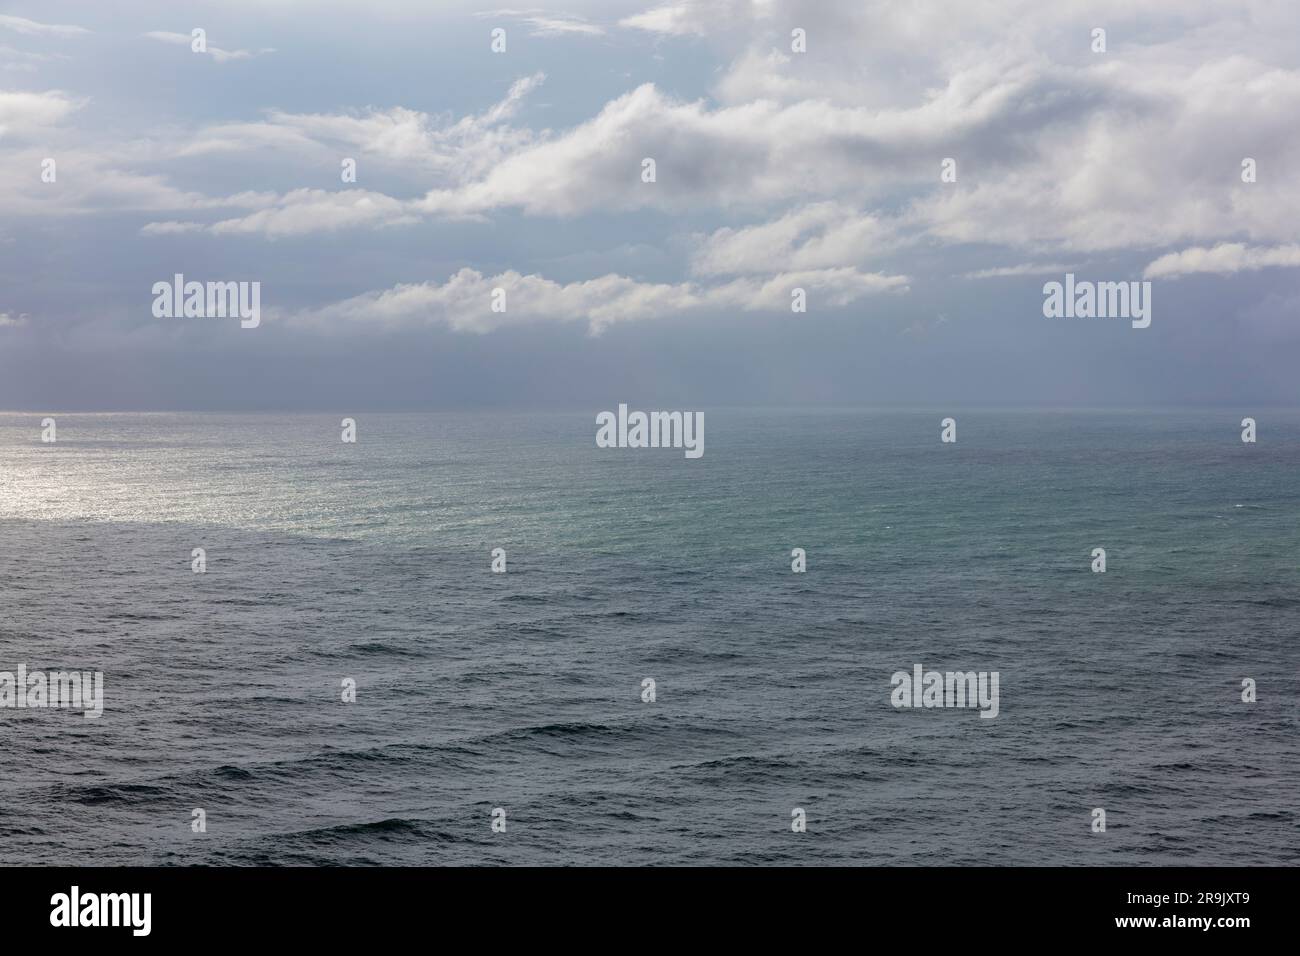 Storm clouds over the Pacific ocean at dusk, green and grey water surface, rain shower and rain cloud. Stock Photo